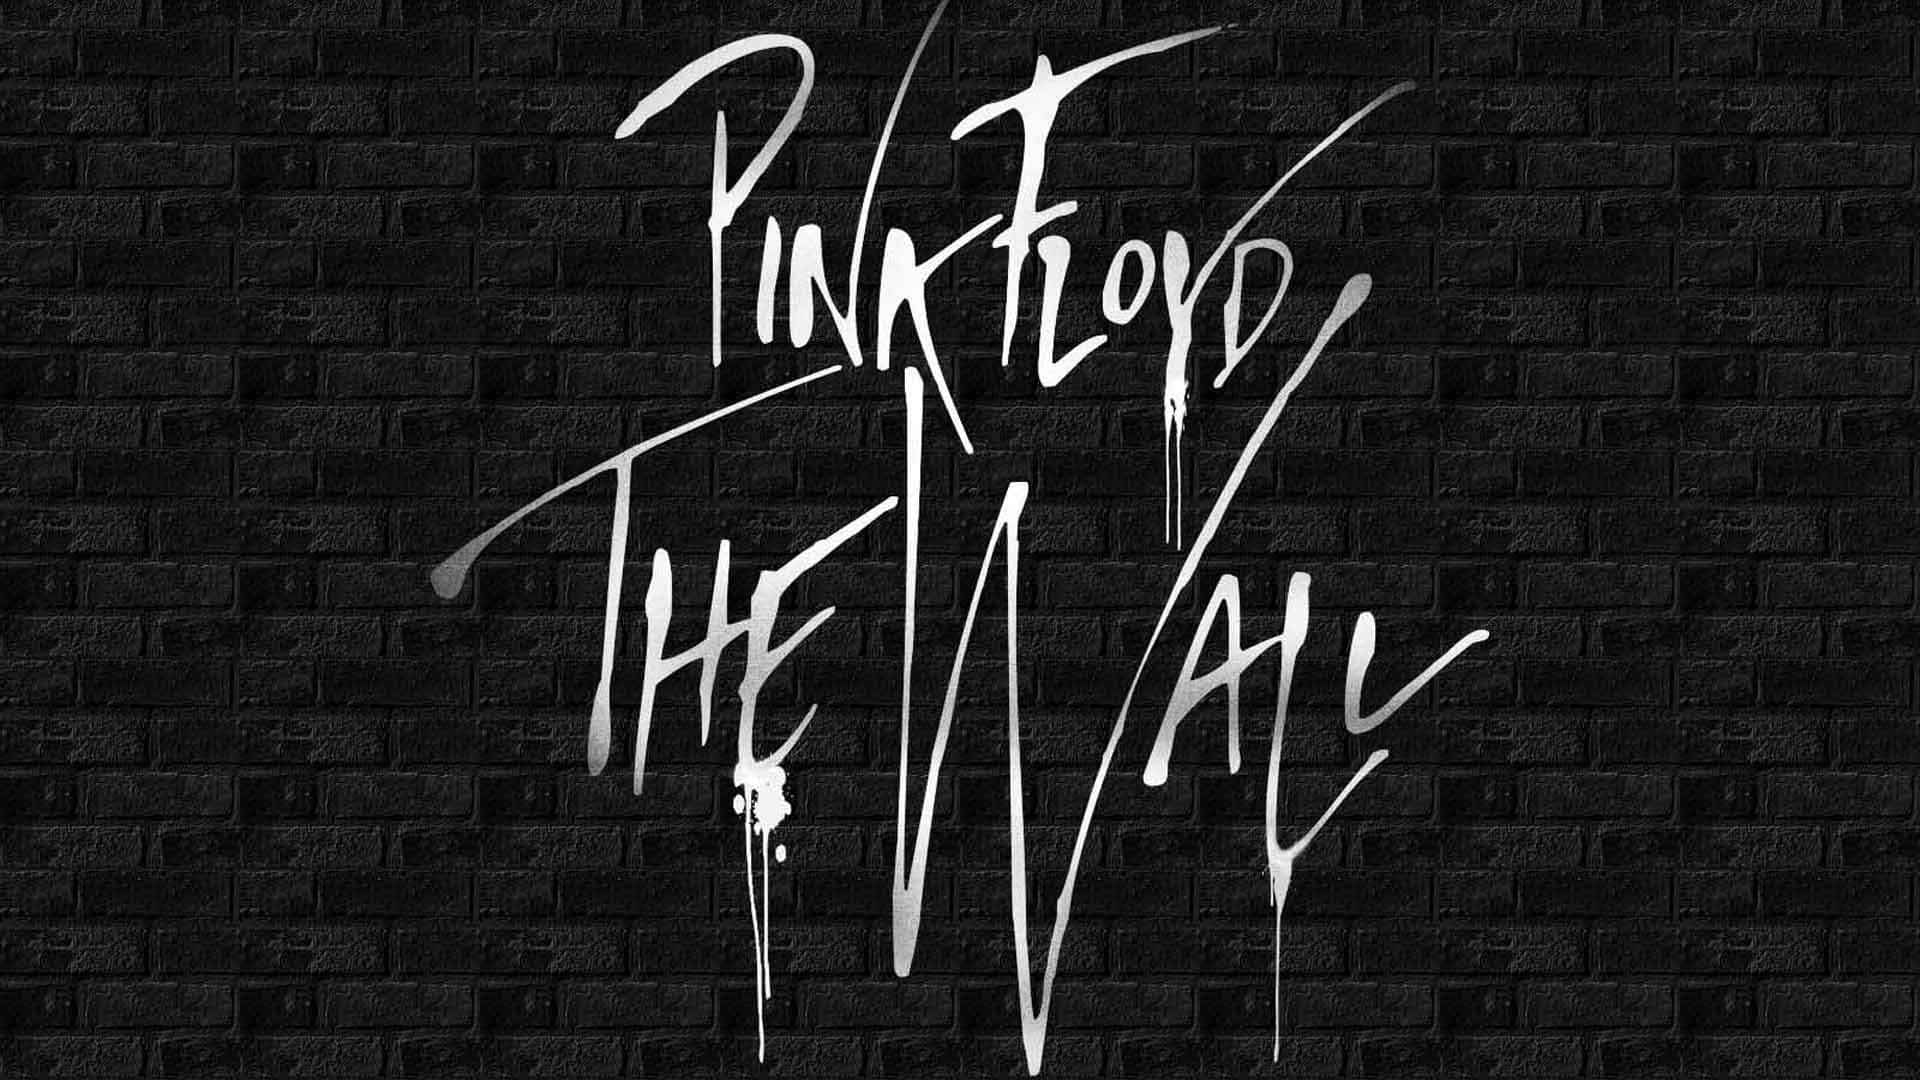 Pink Floyd another Brick in the Wall